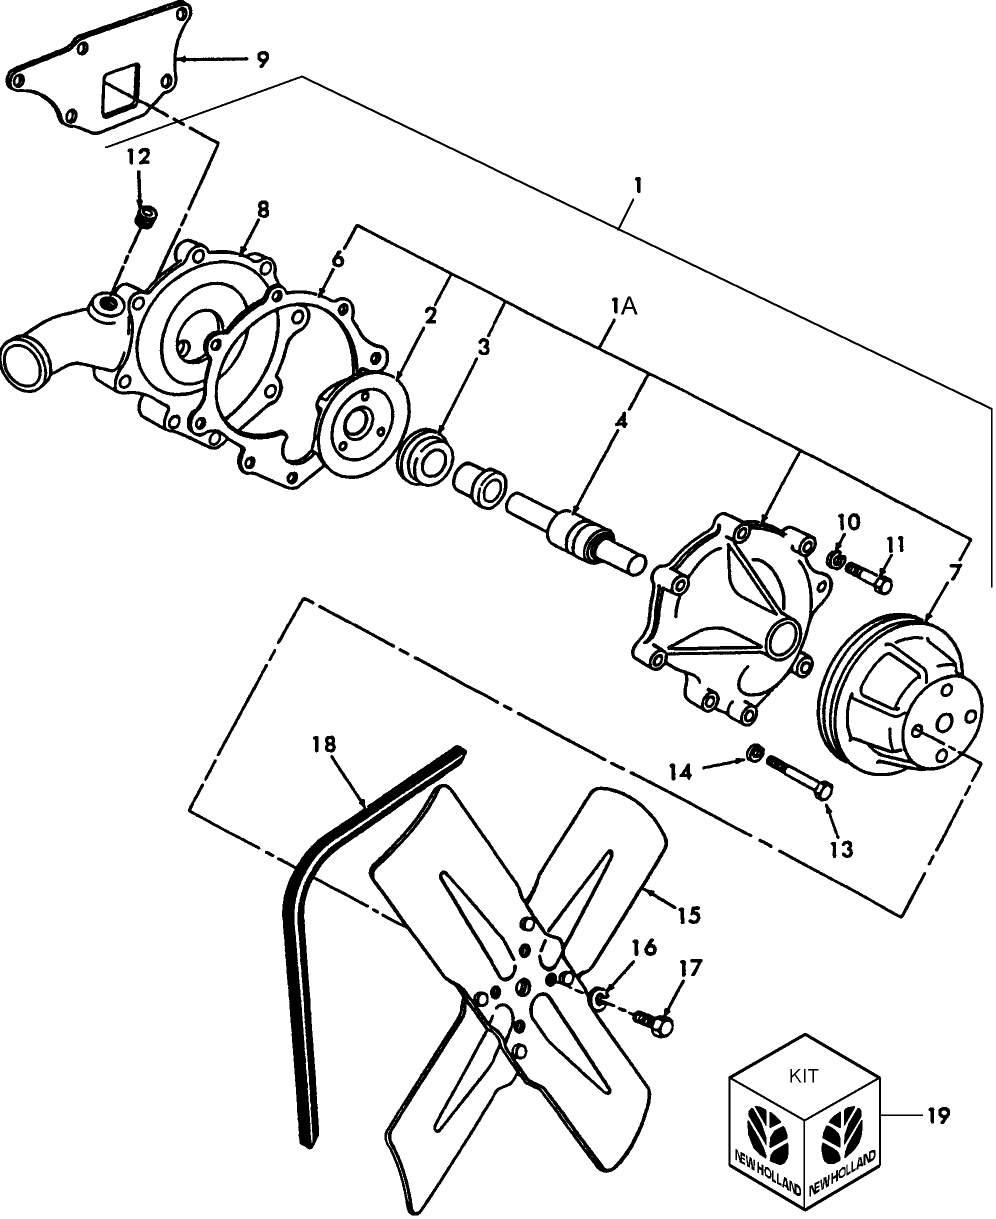 08B01 WATER PUMP & RELATED PARTS